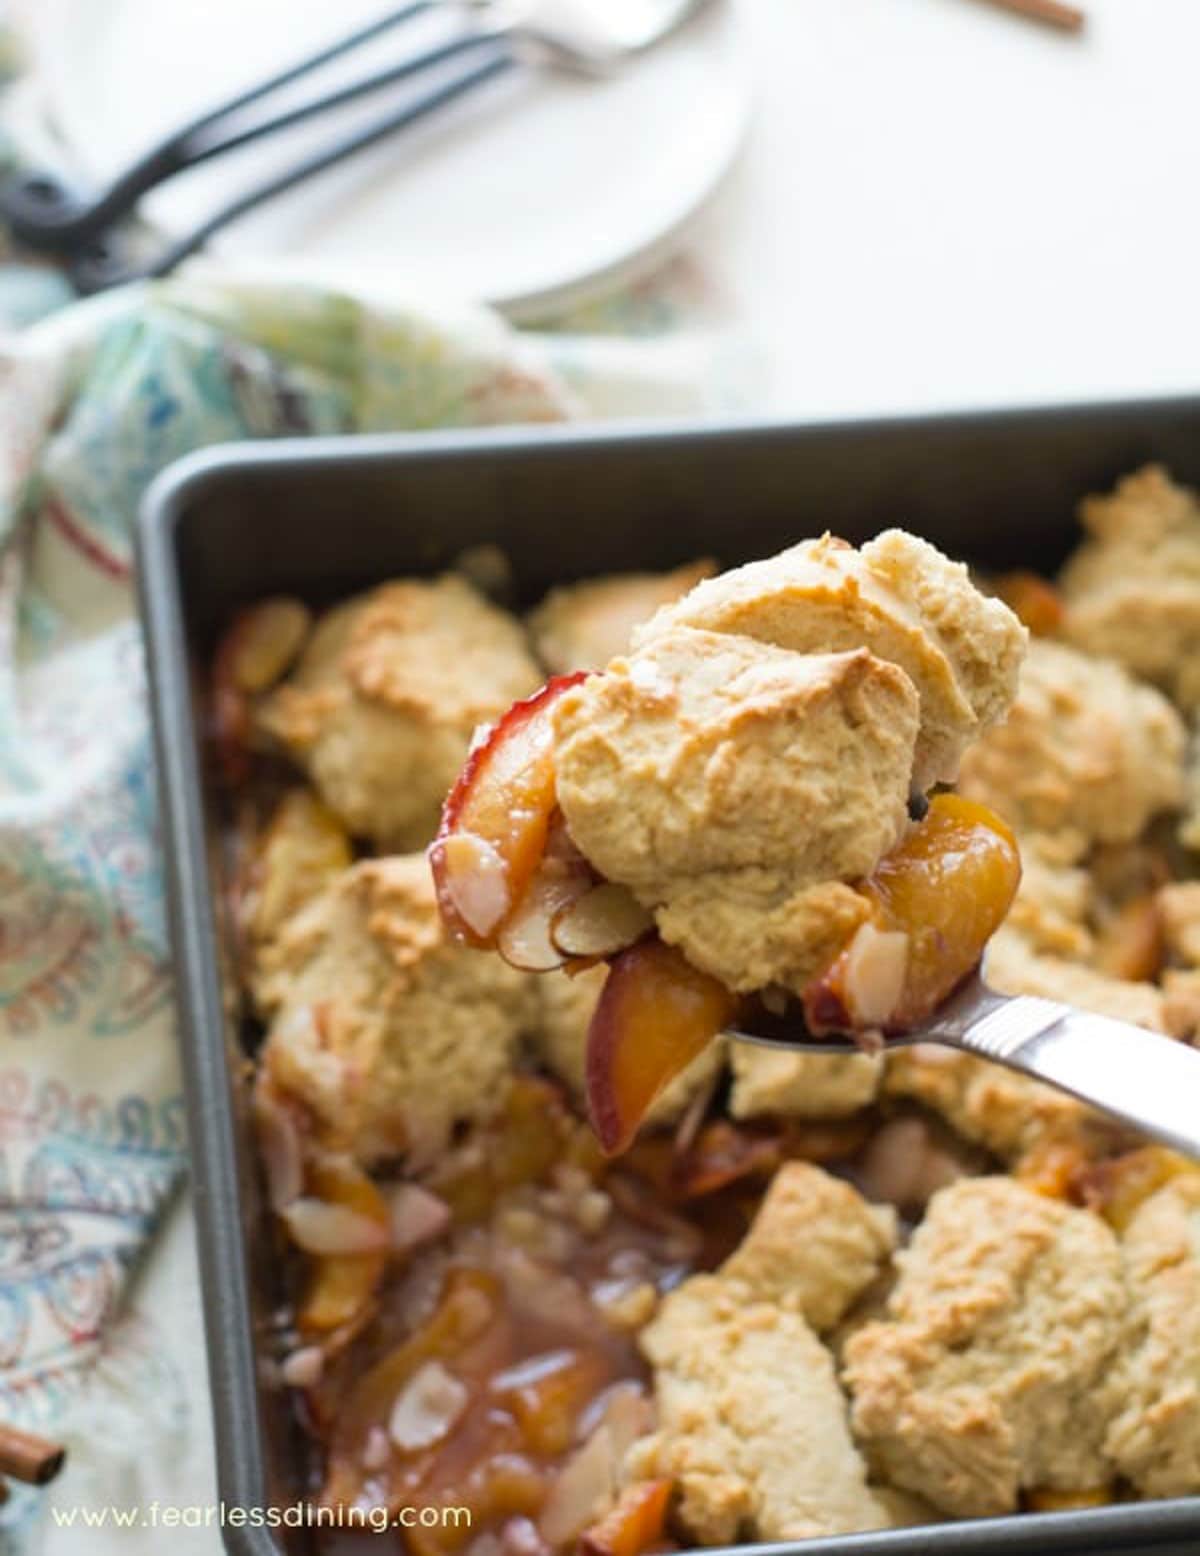 Scooping a serving of cobbler out of the pan.